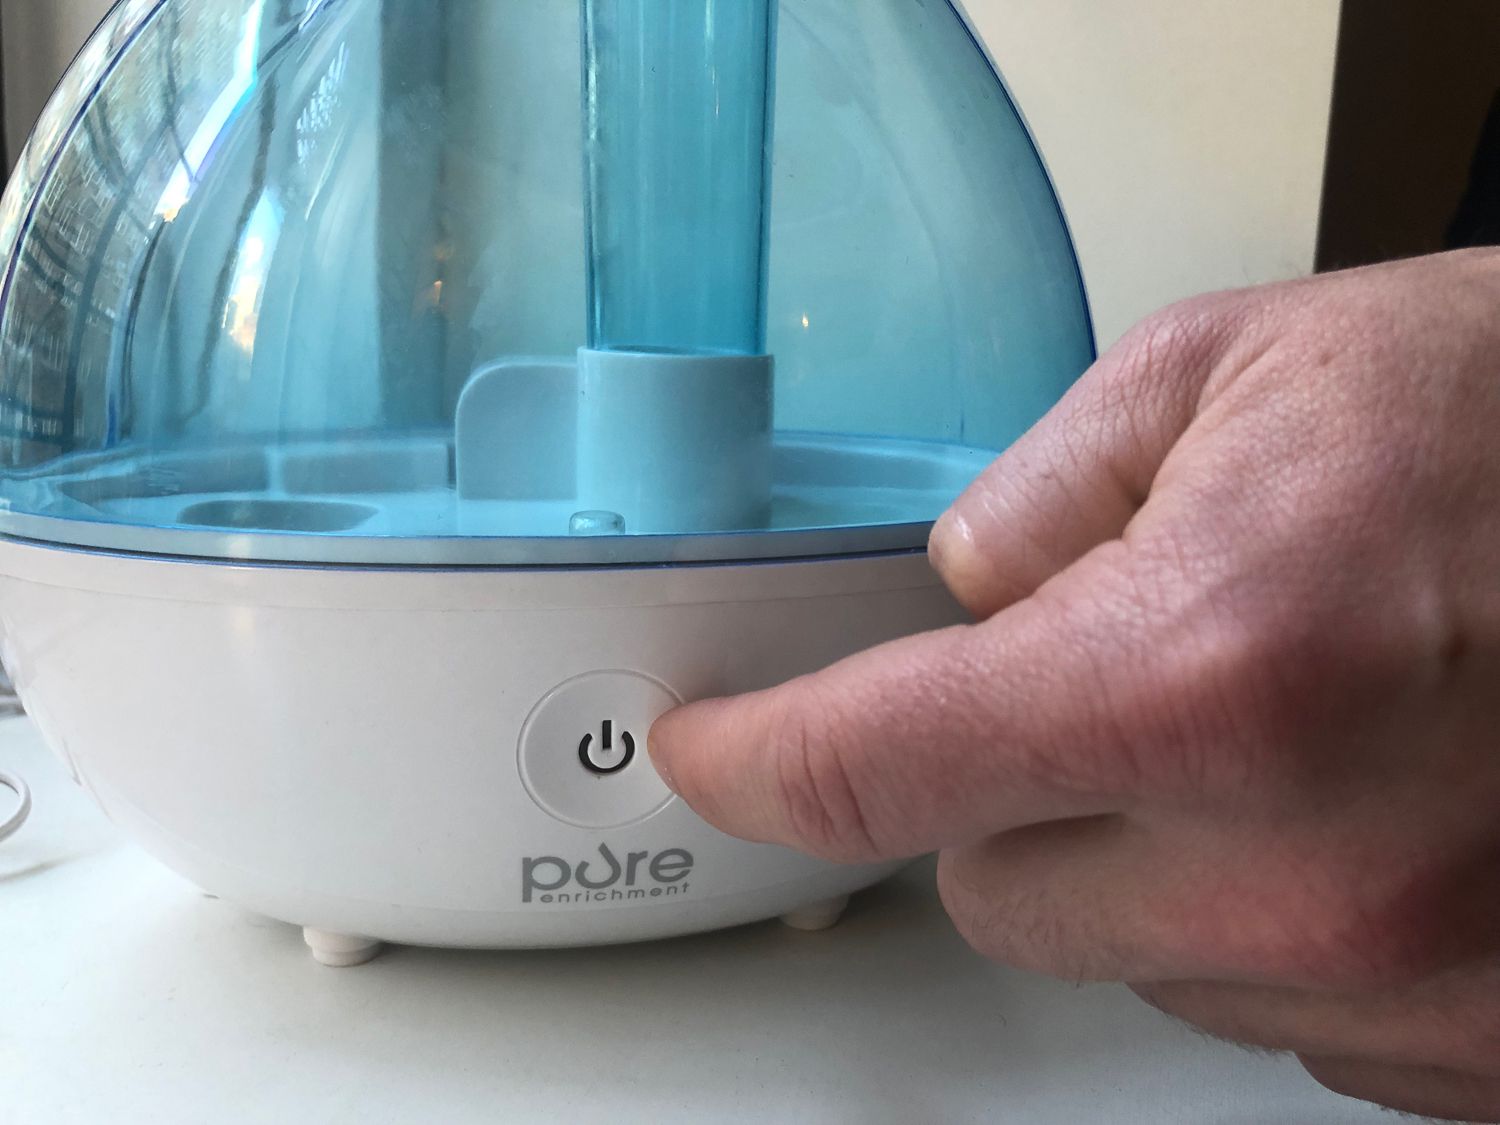 How To Clean Pure Enrichment Humidifier